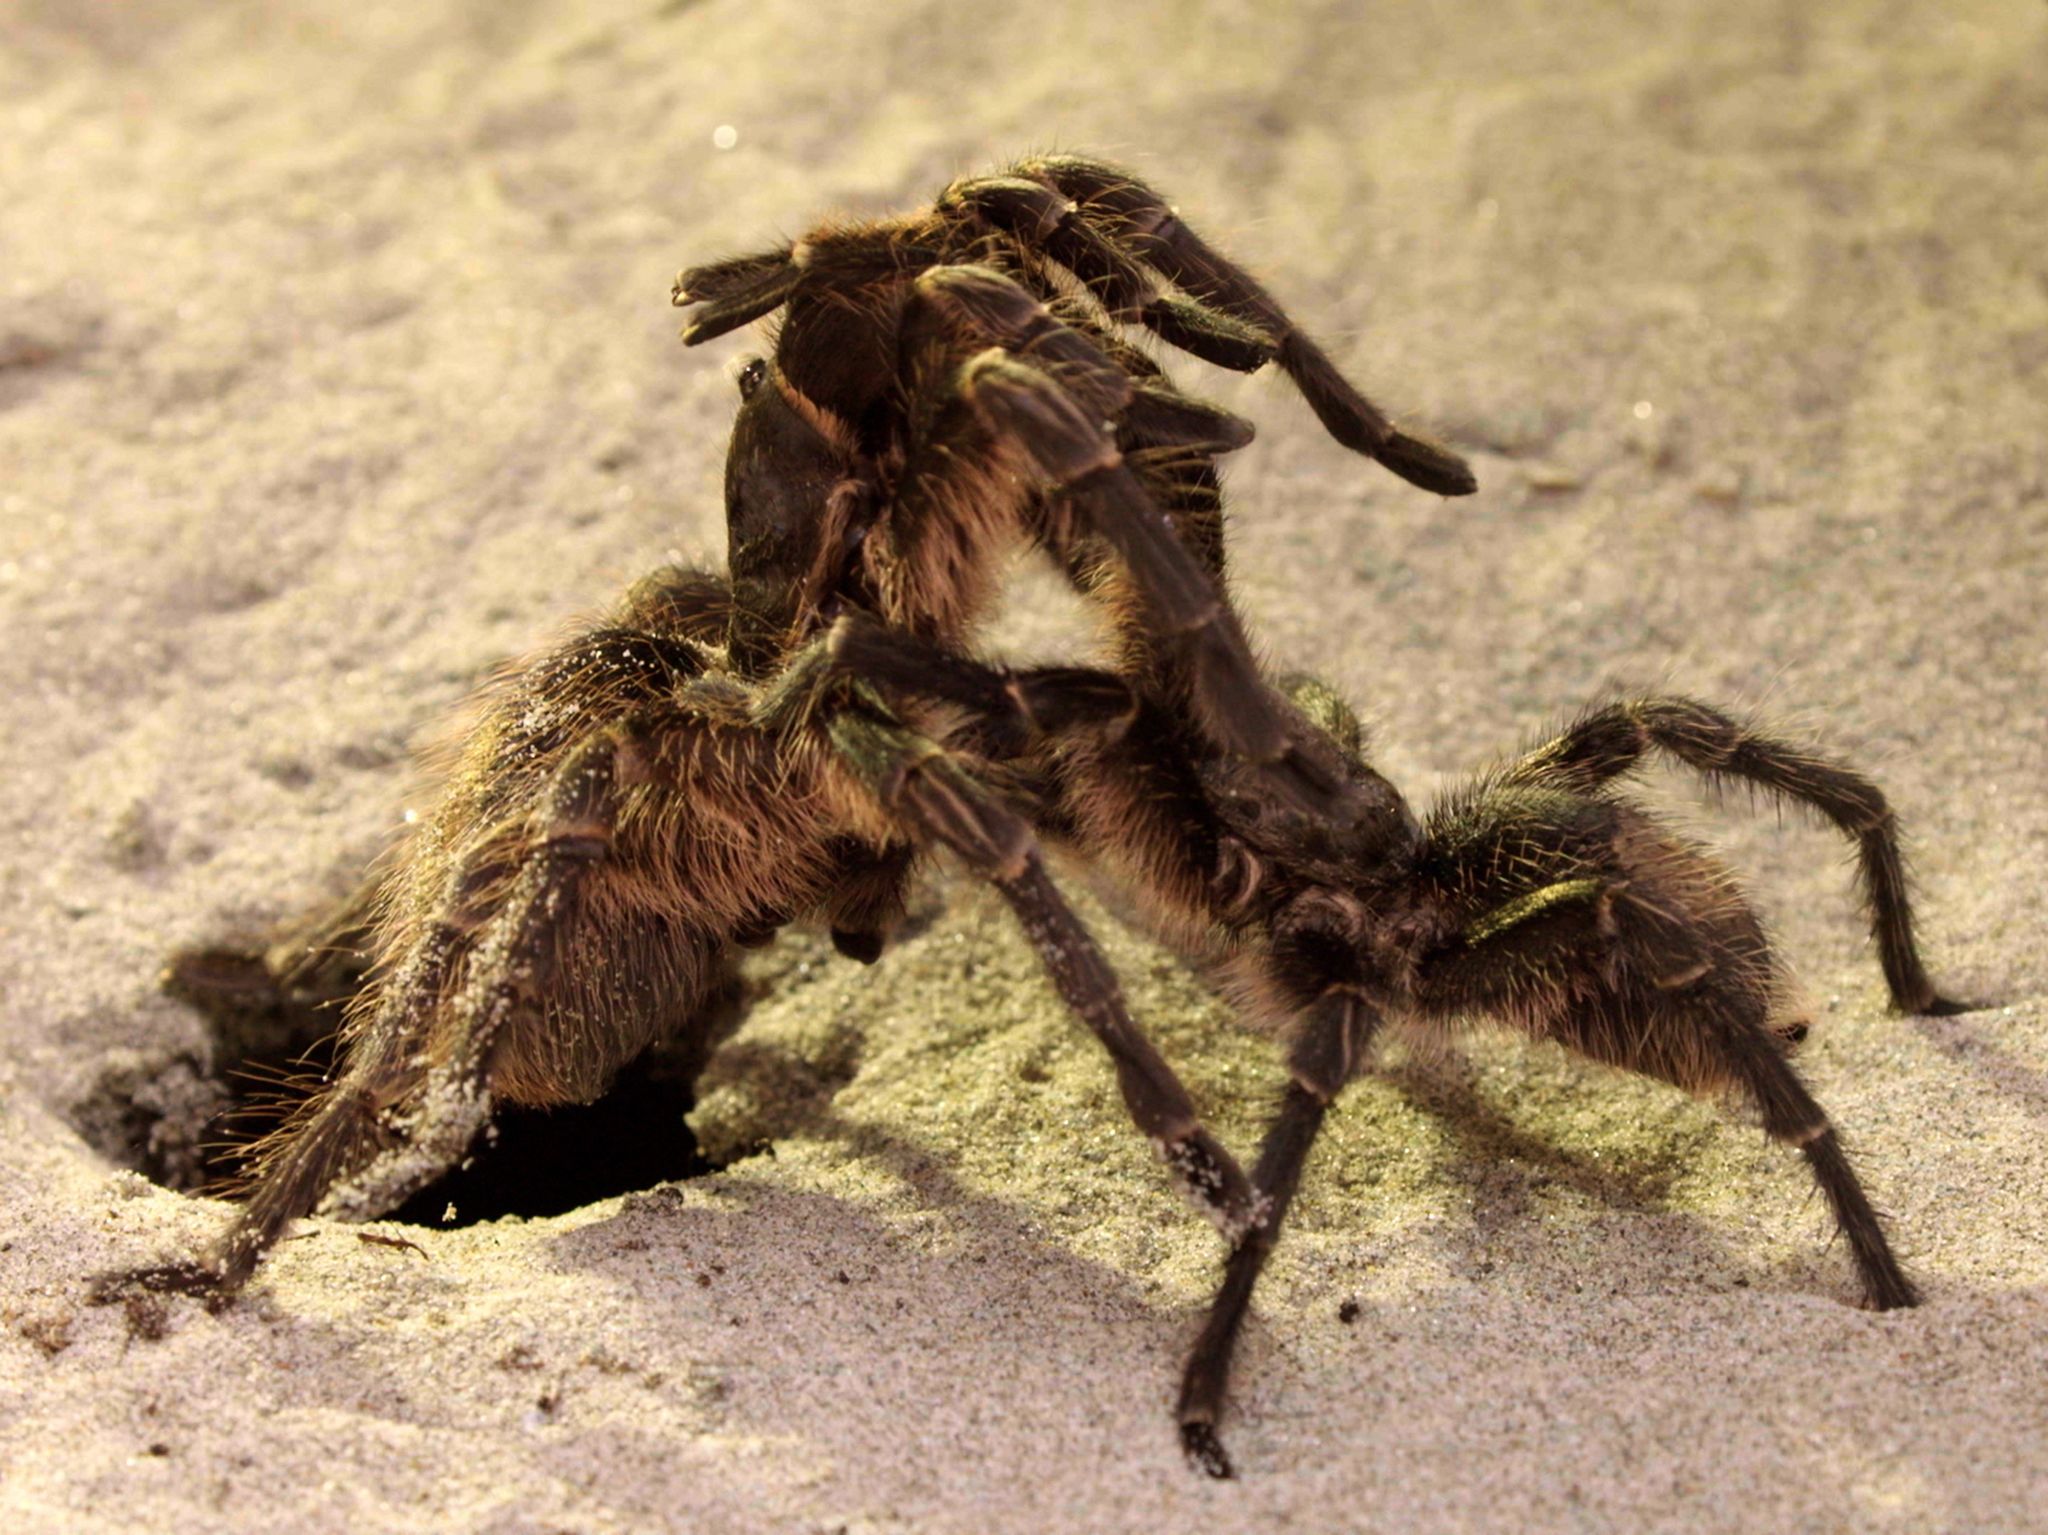 Argentina: Tarantula mating ritual. He strokes her legs gently but quickly in order to subdue... [Photo of the day - June 2017]